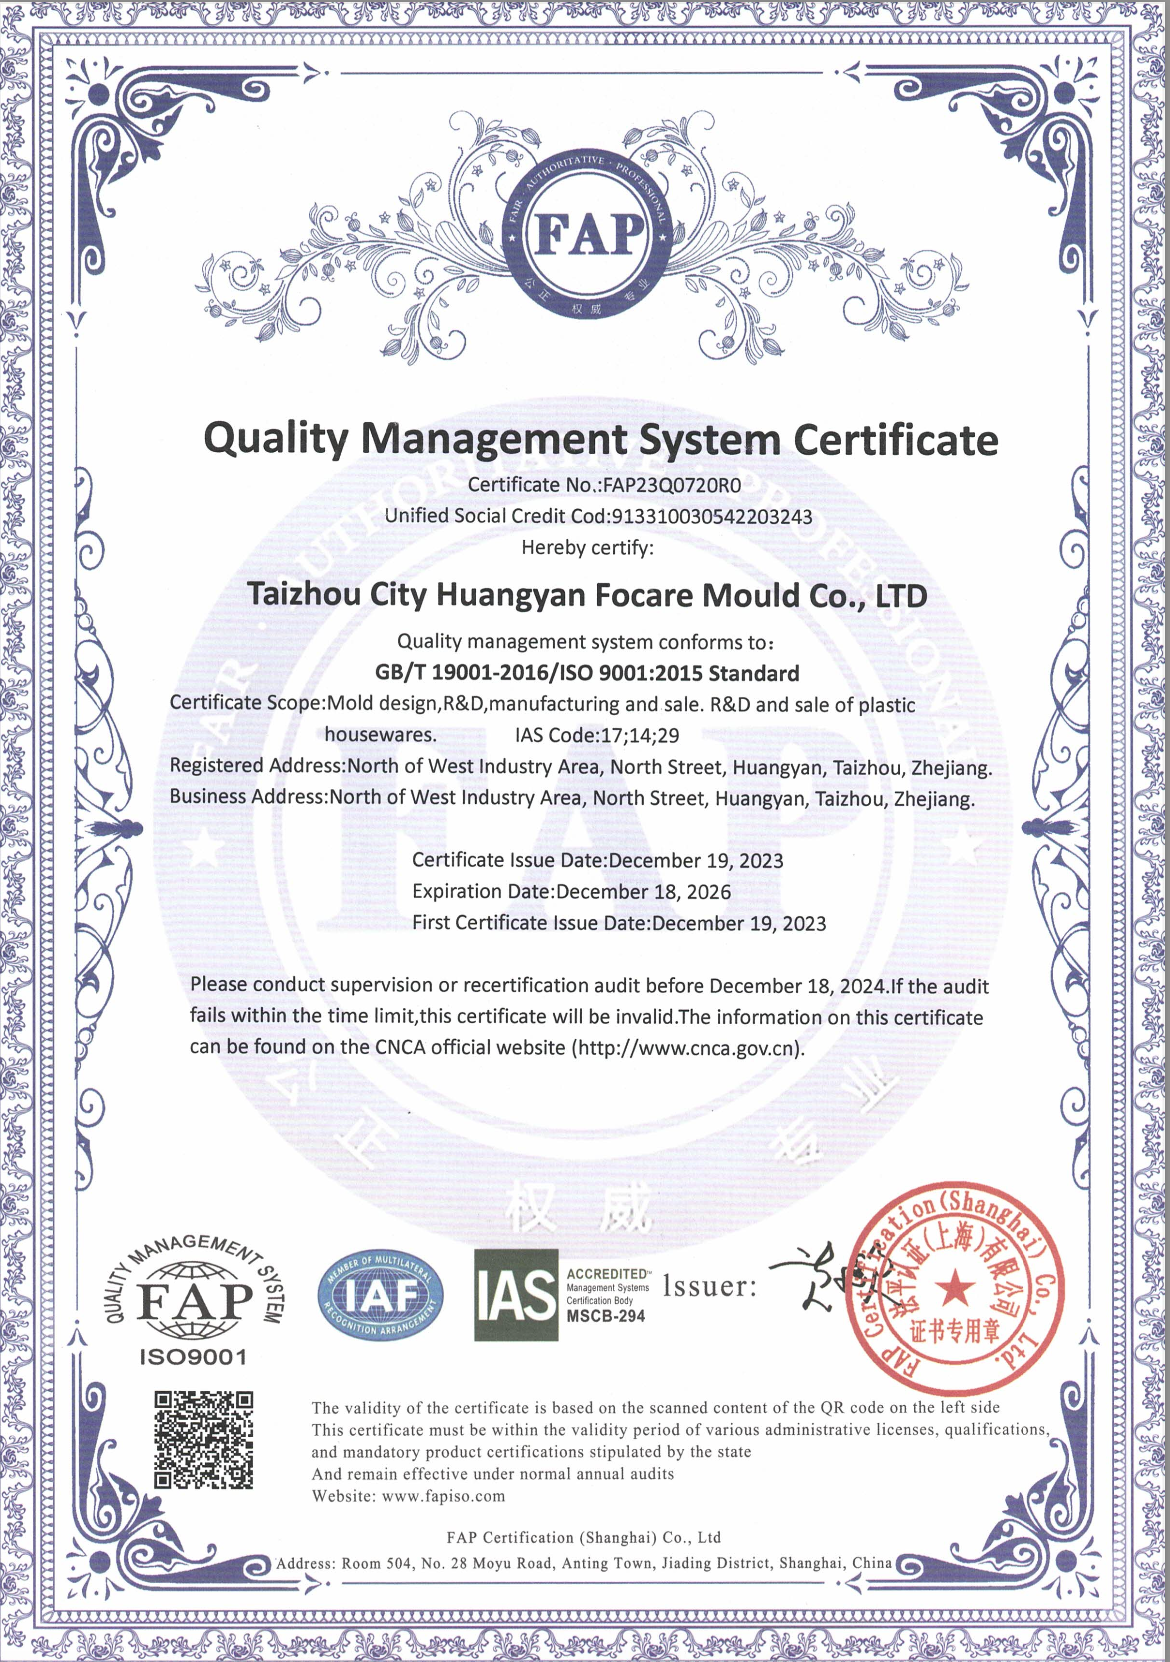 Our quality policy is endorsed by the ISO 9001:2015 standard, to offer you the best quality mold